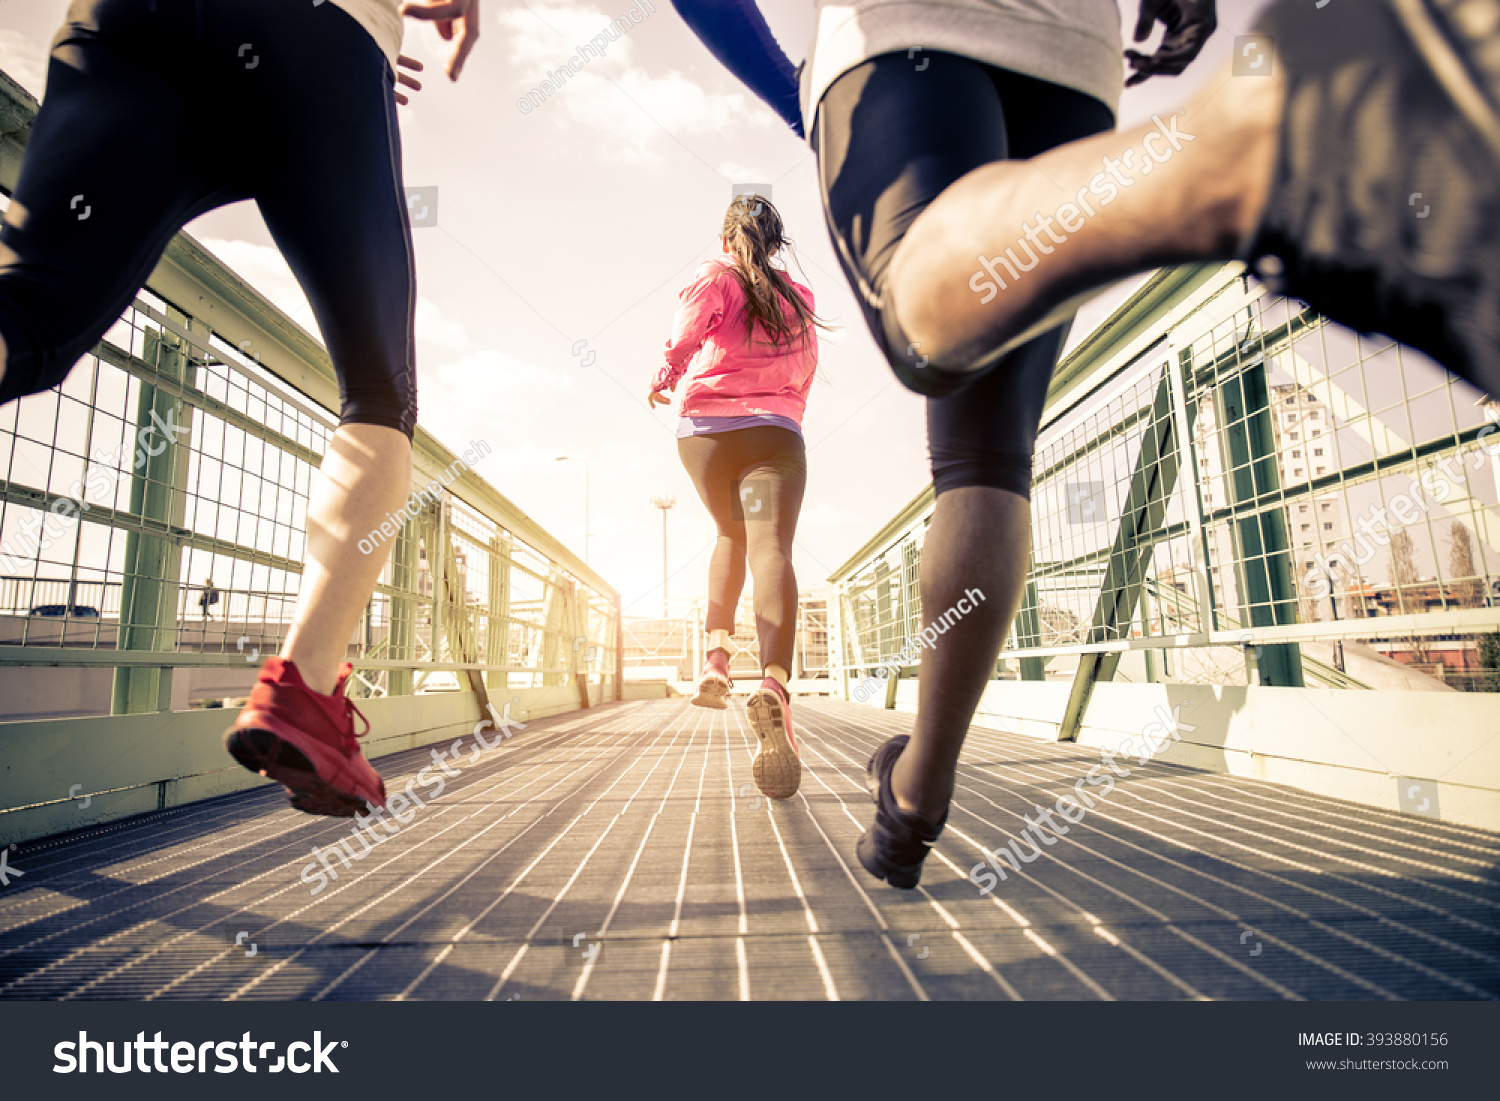 Three runners sprinting outdoors - Sportive people training in a urban area, healthy lifestyle and sport concepts #393880156